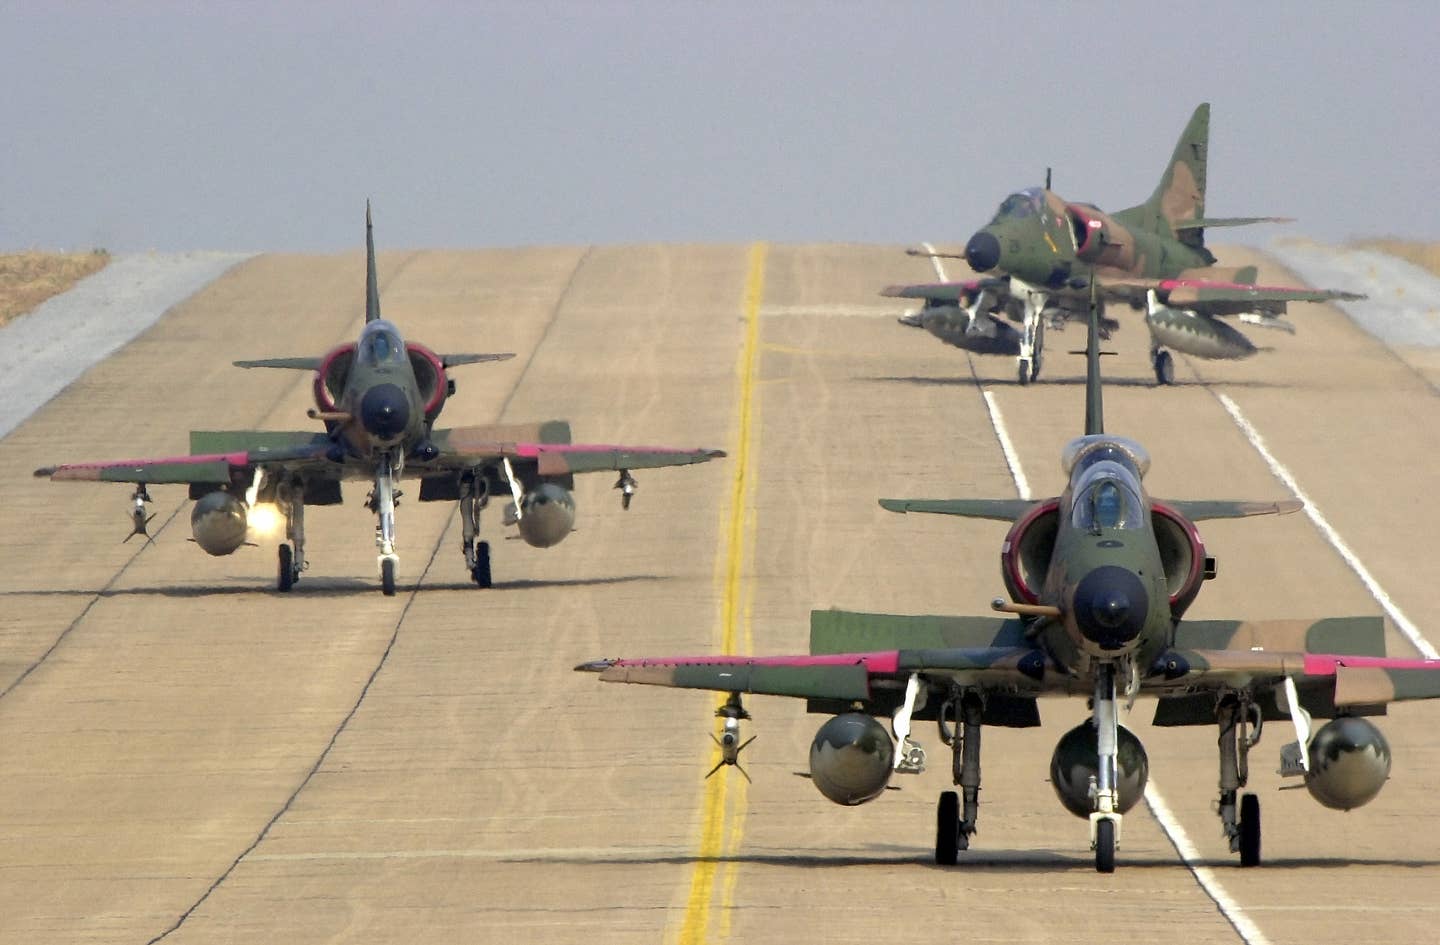 Three Republic of Singapore Air Force A-4SU Skyhawk aircraft taxi on the flight line at Korat AB, Thailand, during Exercise COPE TIGER '02. (USAF photo)